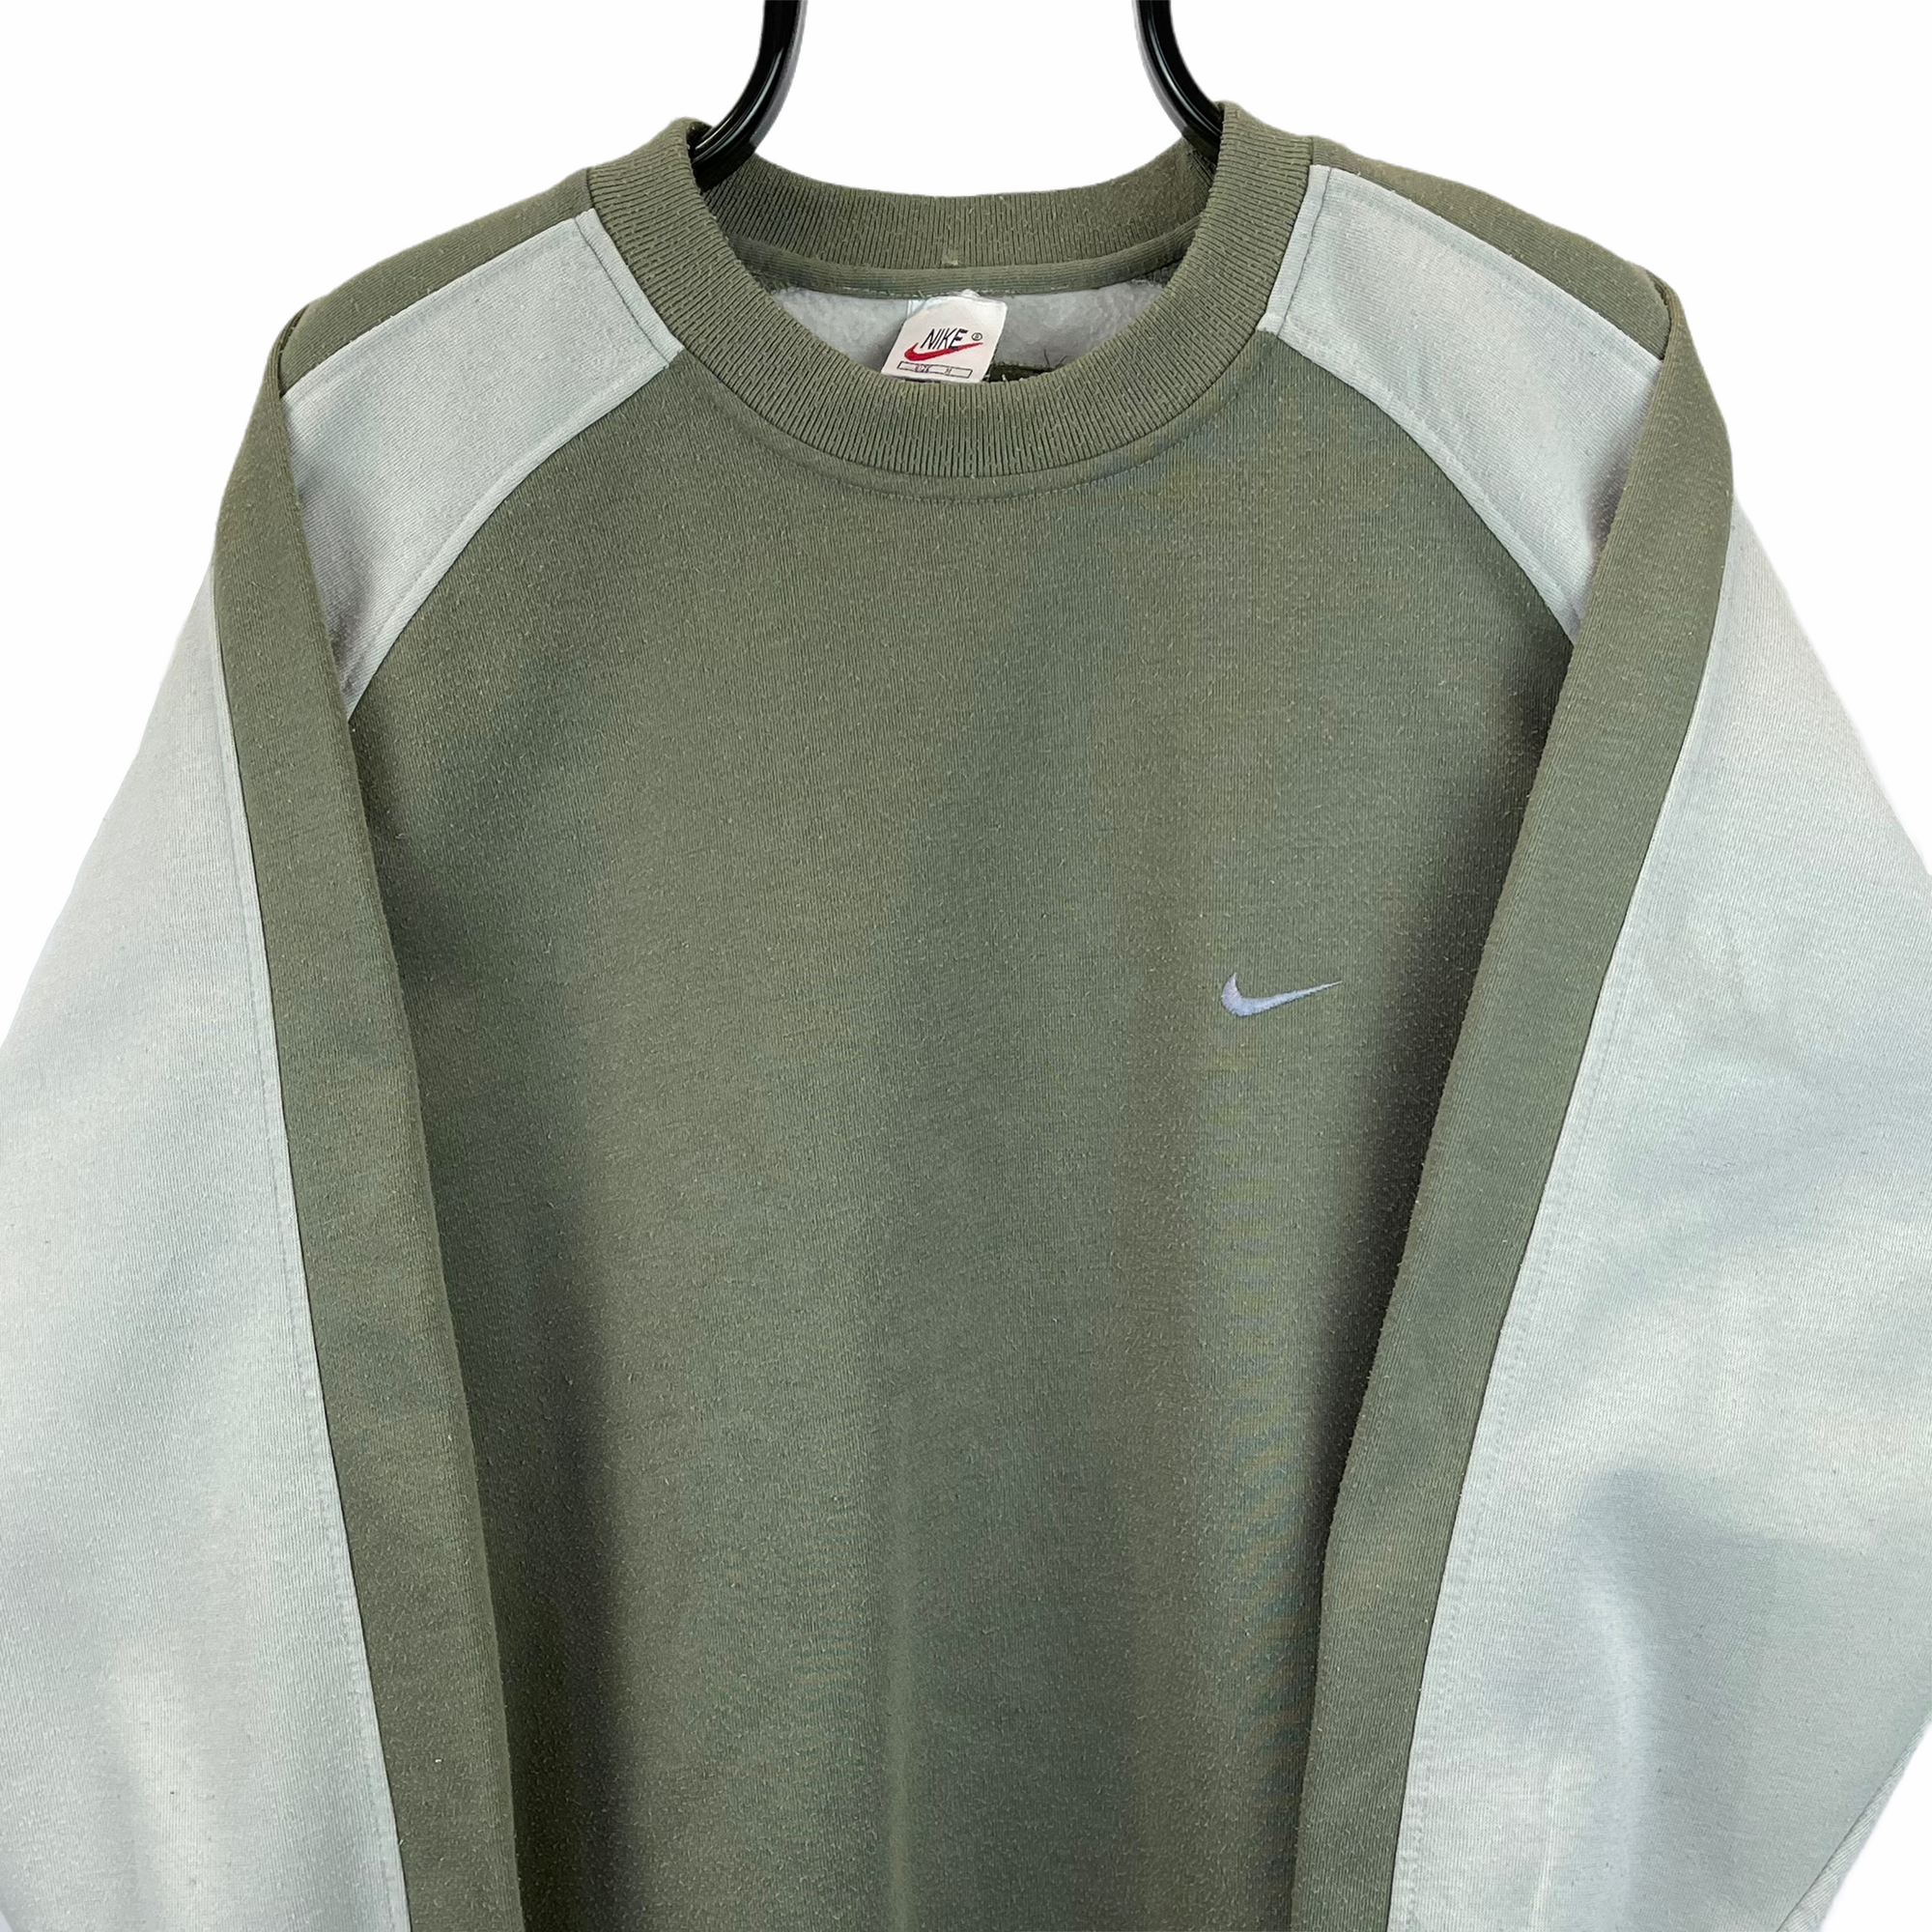 Vintage 90s Nike Embroidered Small Swoosh Sweatshirt in Olive & Beige - Men's Large/Women's XL